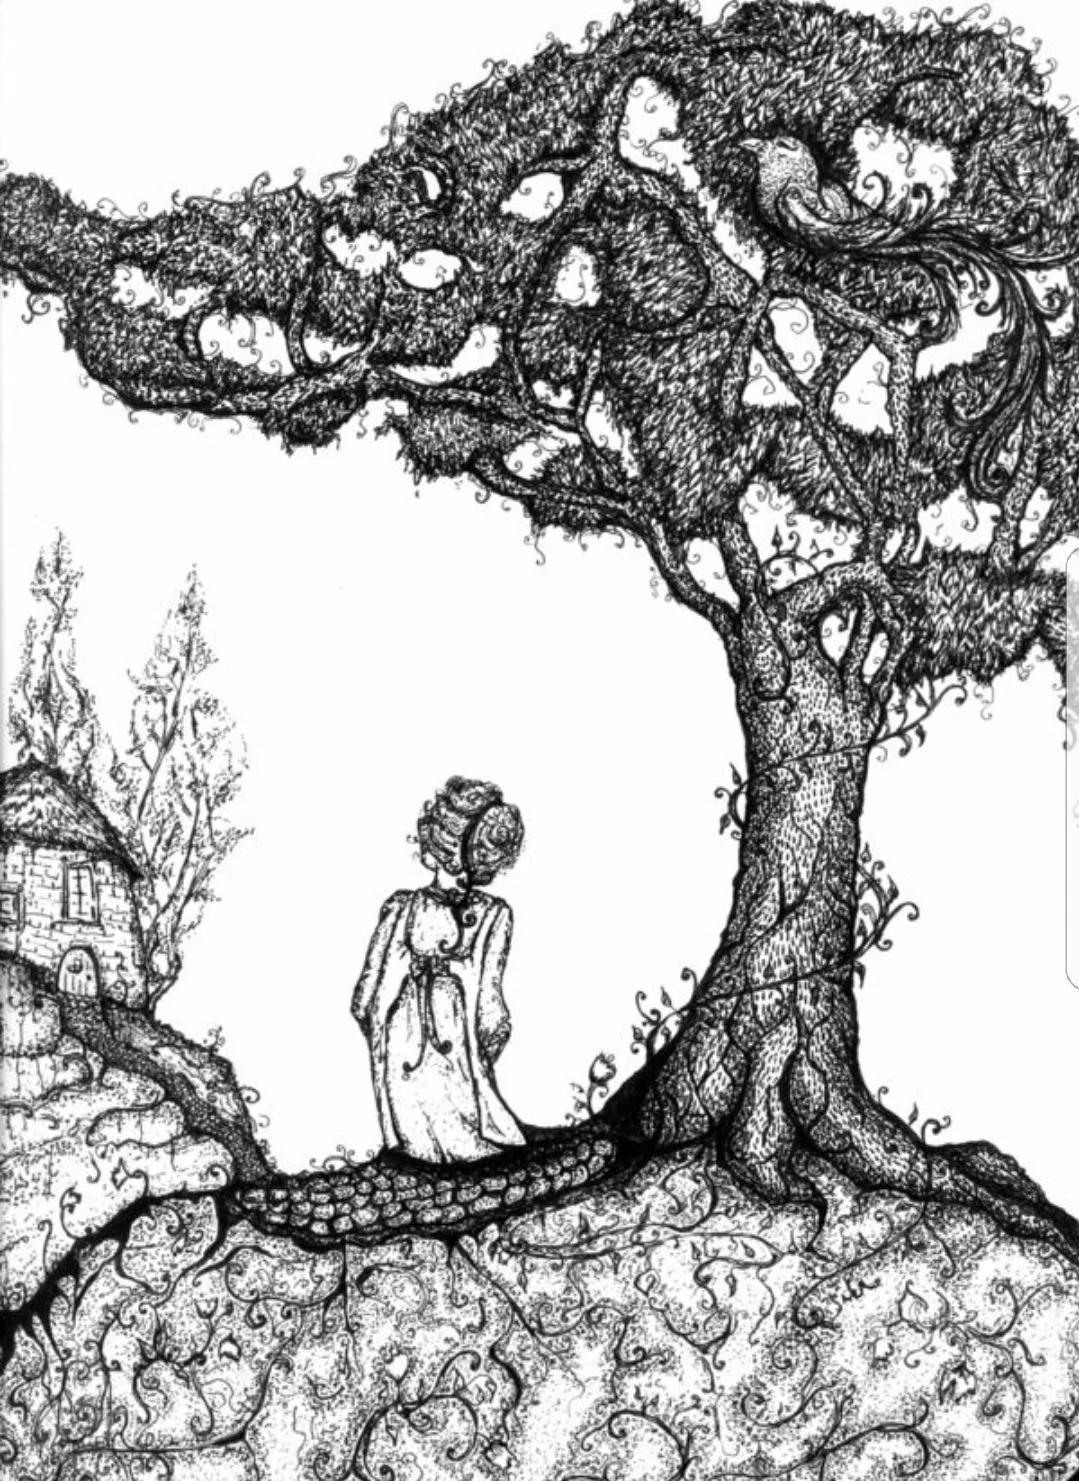 The Juniper Tree - an original dark legend from the Brothers Grimm